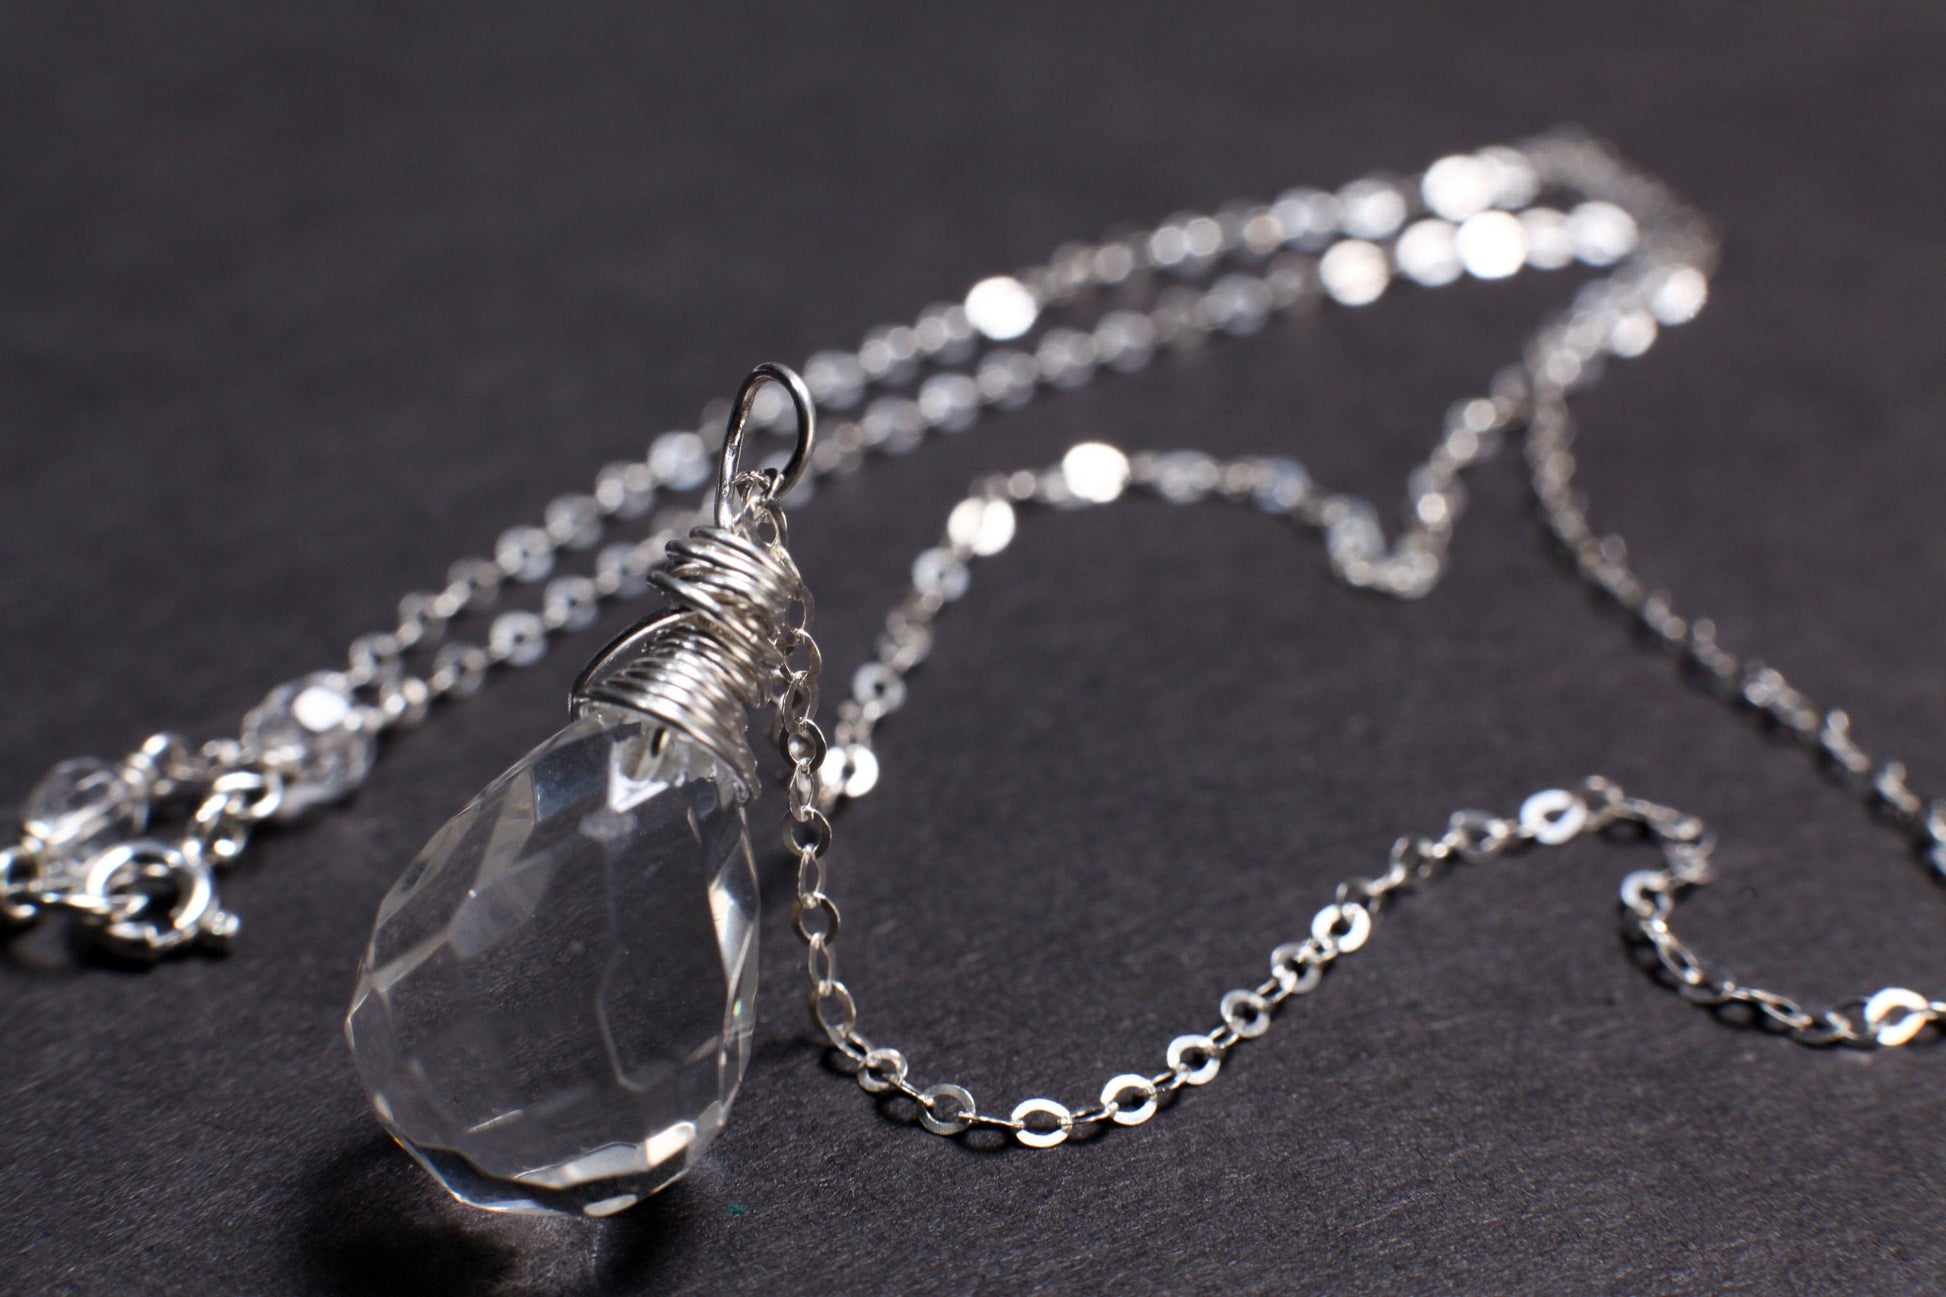 Natural Rock Crystal,Clear Quartz 12x17mm Faceted Briolette Drop Wire Wrapped Gemstone Pendant in 925 Sterling Silver Chain, necklace.